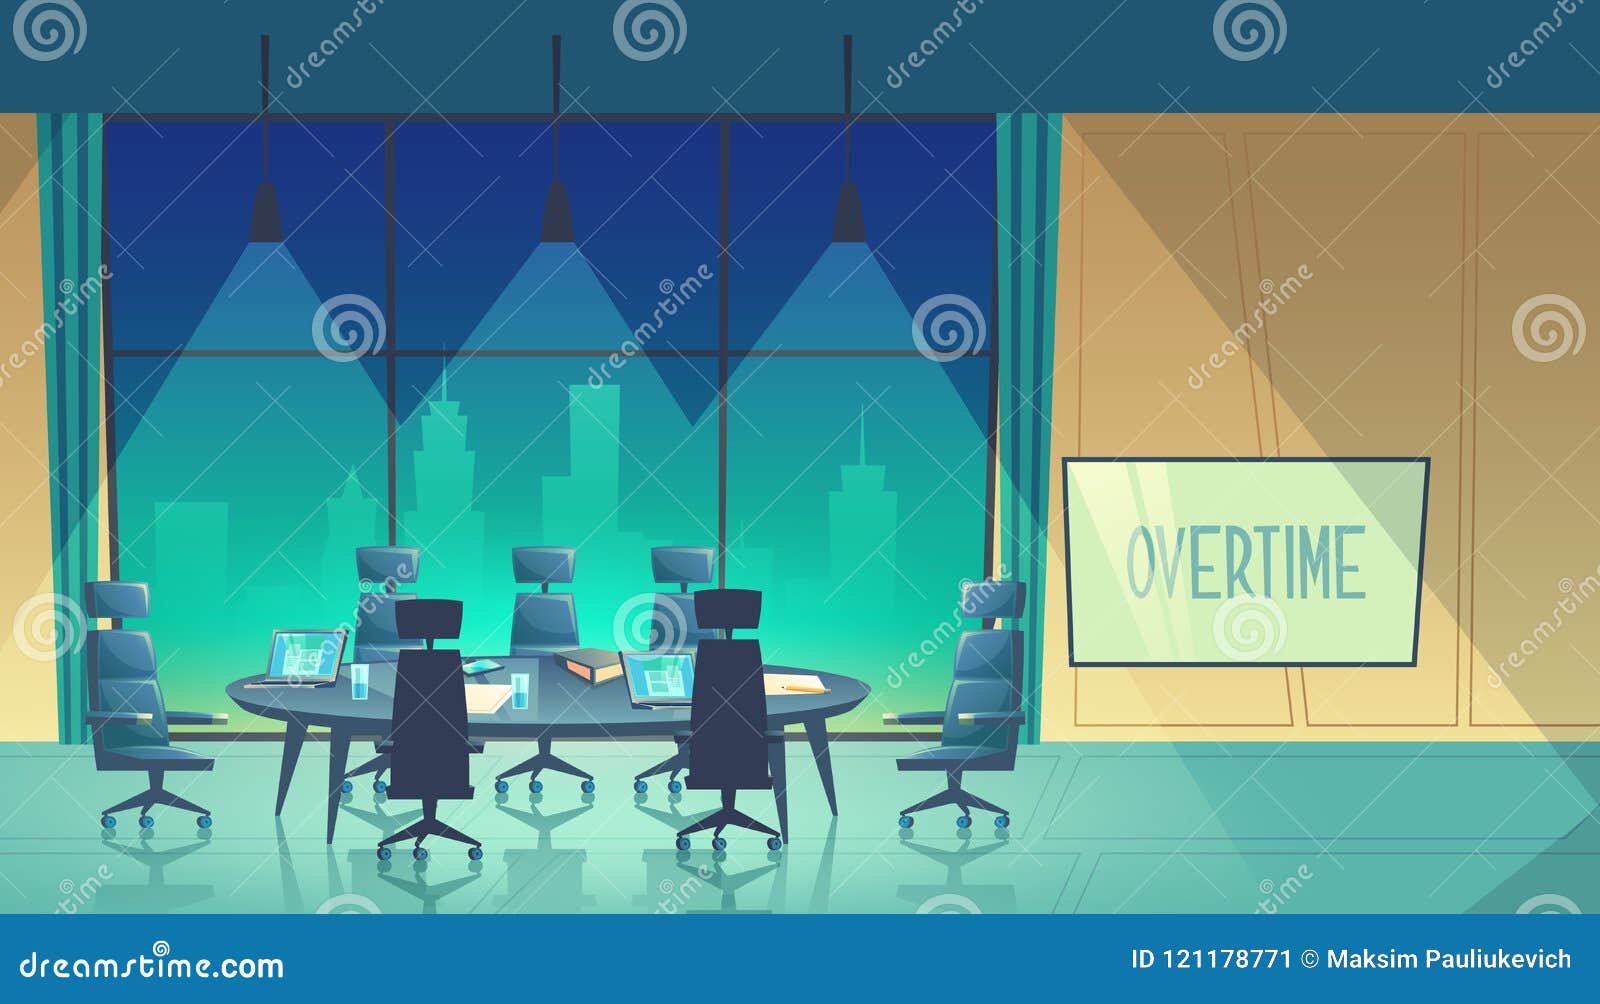  overtime concept - conference hall at night